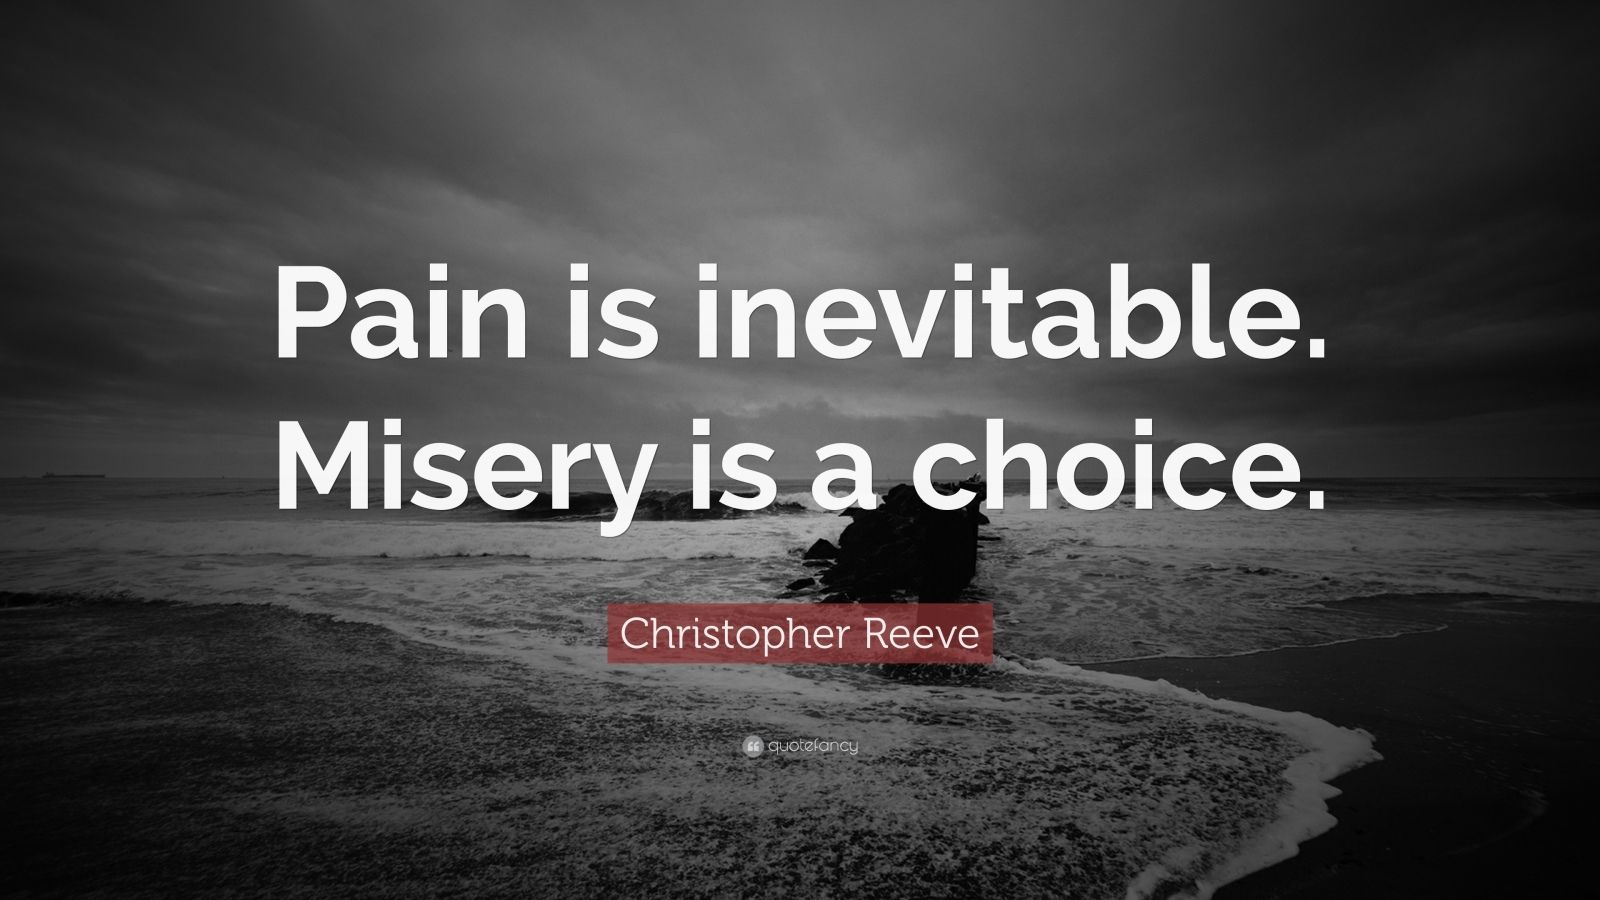 1066967 Christopher Reeve Quote Pain is inevitable Misery is a choice